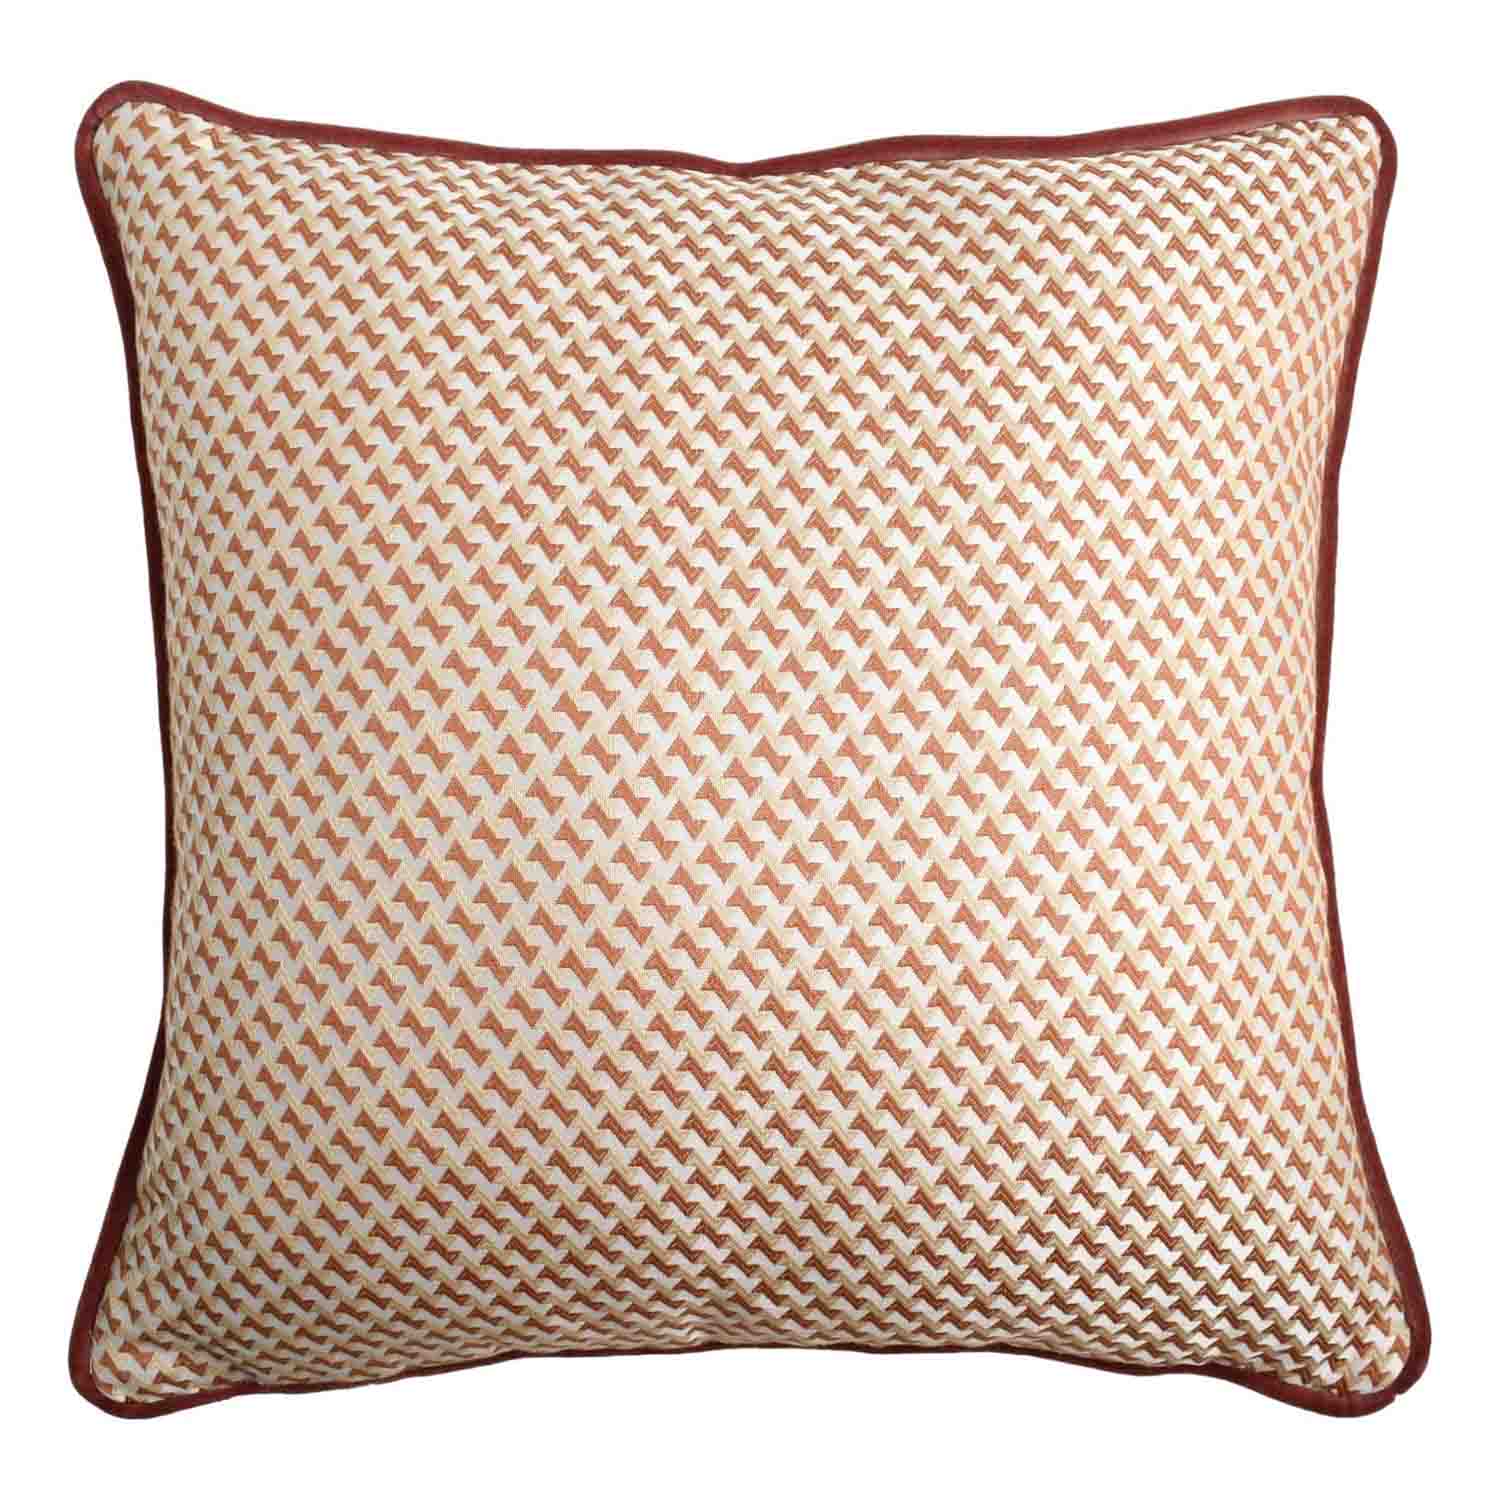 Square Carrè Cushion in Micro-Patterned jacquard fabric - Main view